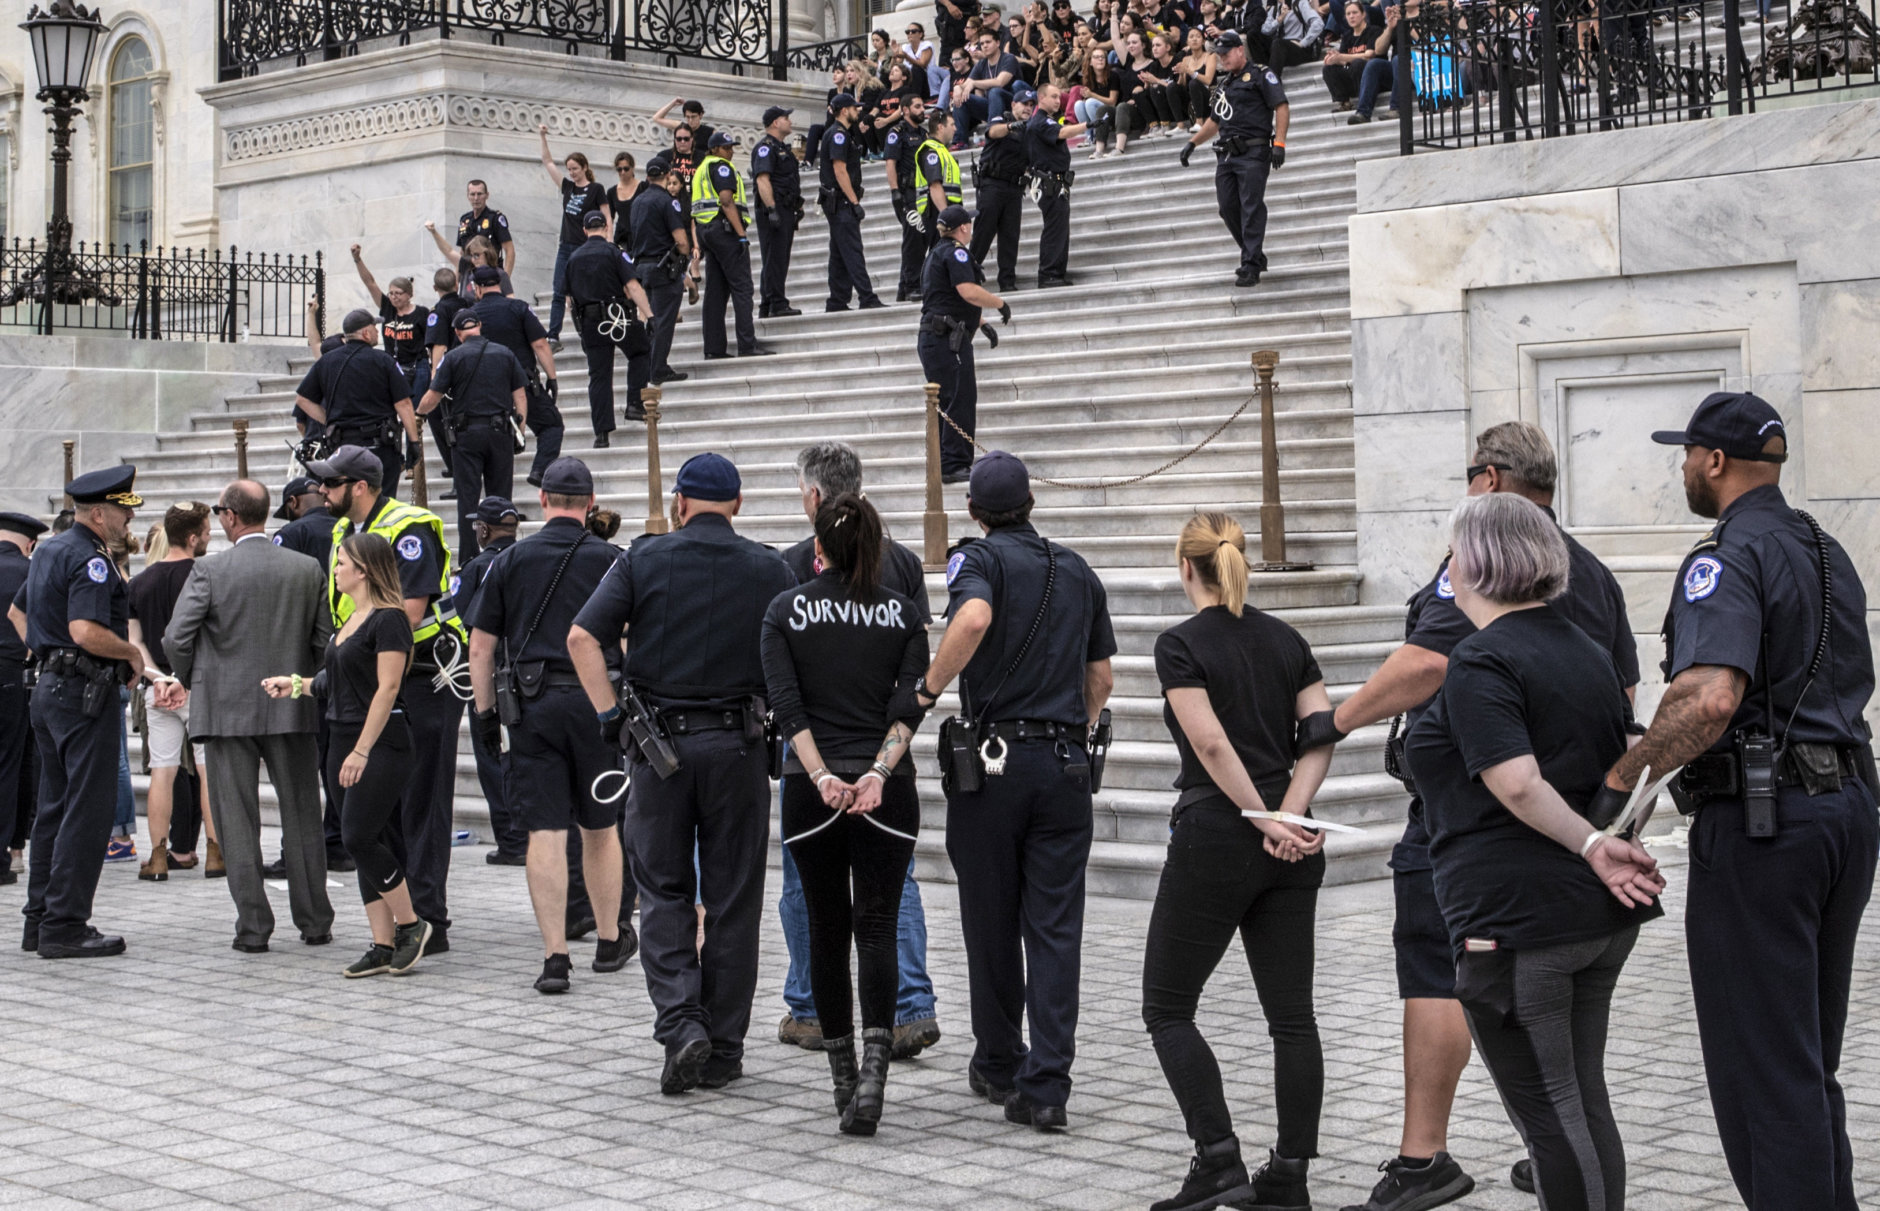 Crowds of activists are arrested after they rushed past barriers and protested from the steps of the Capitol before the confirmation vote on President Donald Trump's Supreme Court nominee, Brett Kavanaugh, in Washington, Saturday, Oct. 6, 2018. (AP Photo/J. Scott Applewhite)